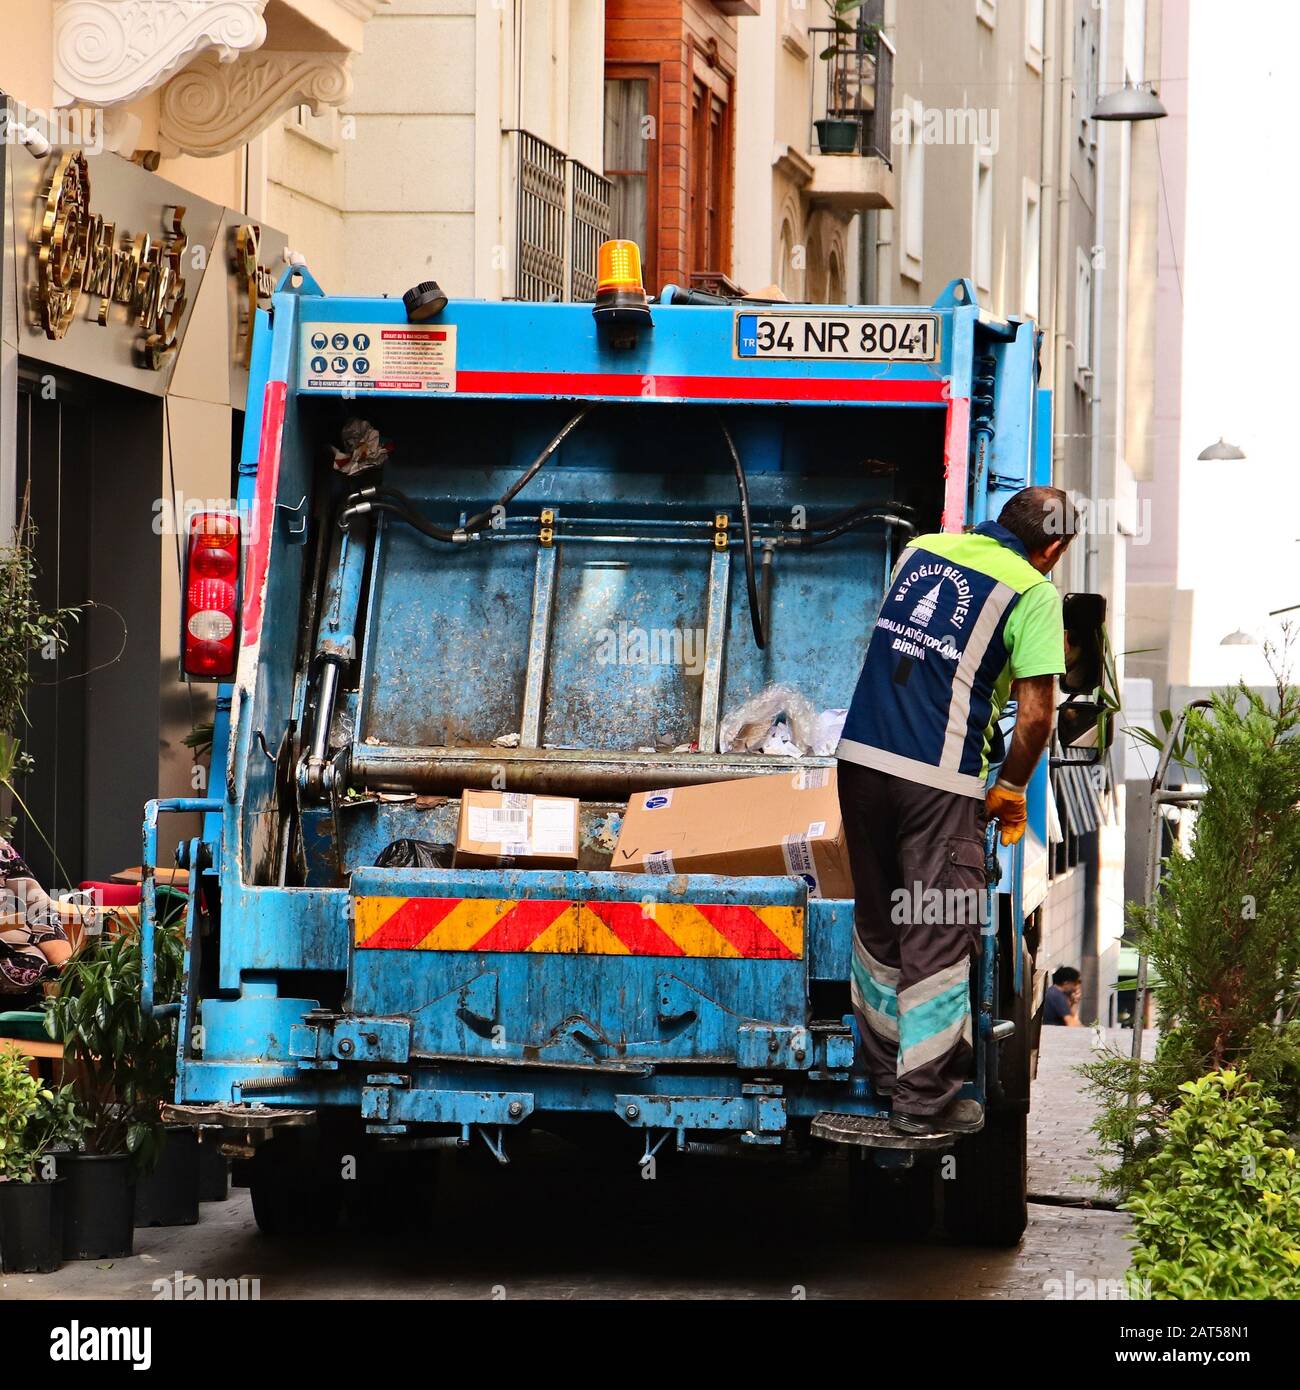 ISTANBUL, TURKEY - Sep 16, 2019: A garbage collection truck and bin man keeping the streets clean. Waste management concept image. Stock Photo